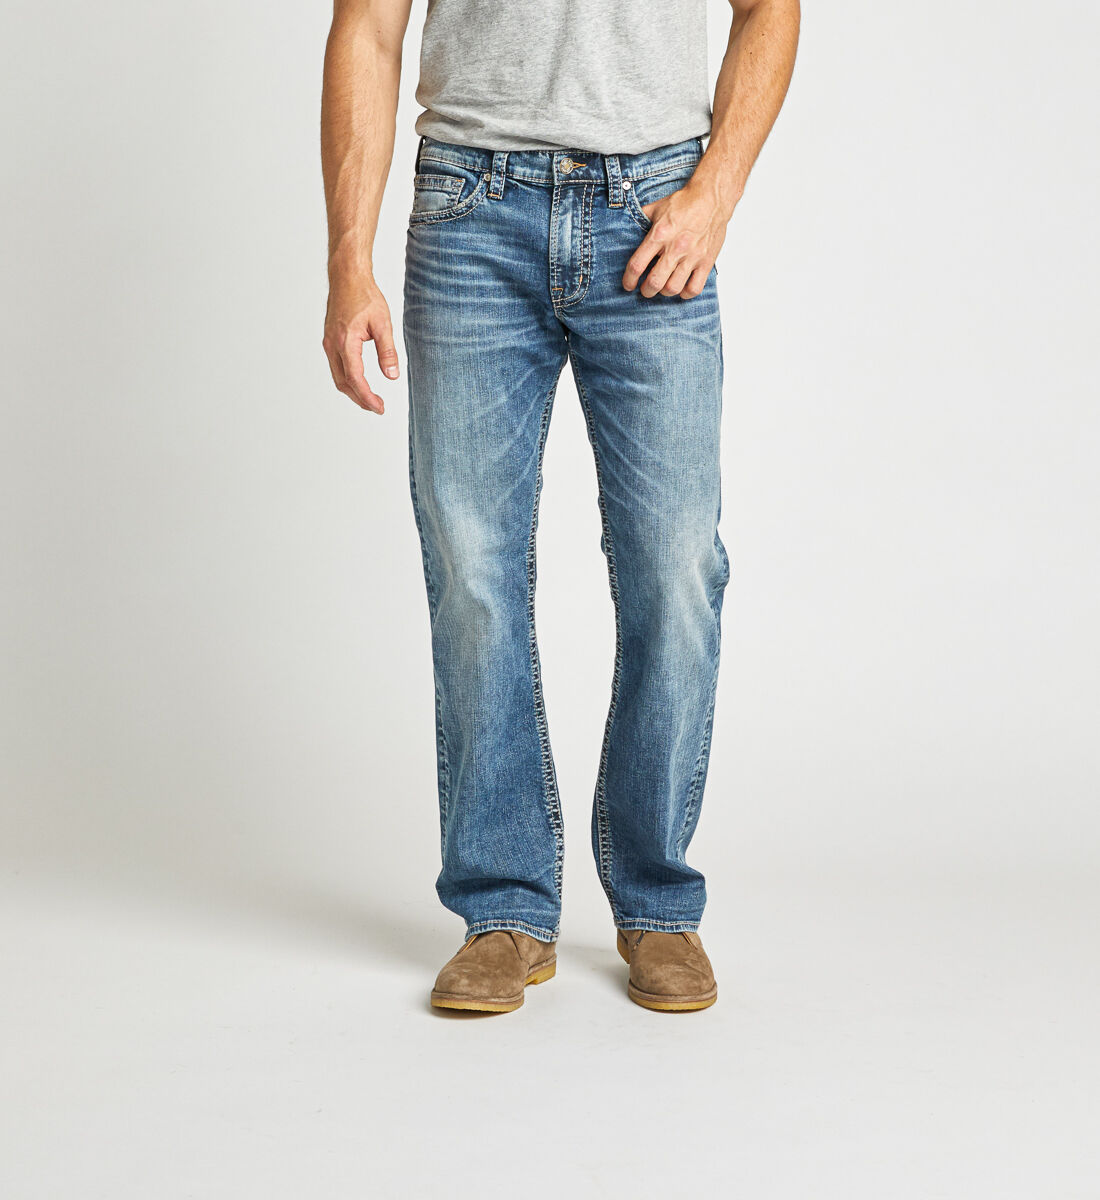 red button jeans sale